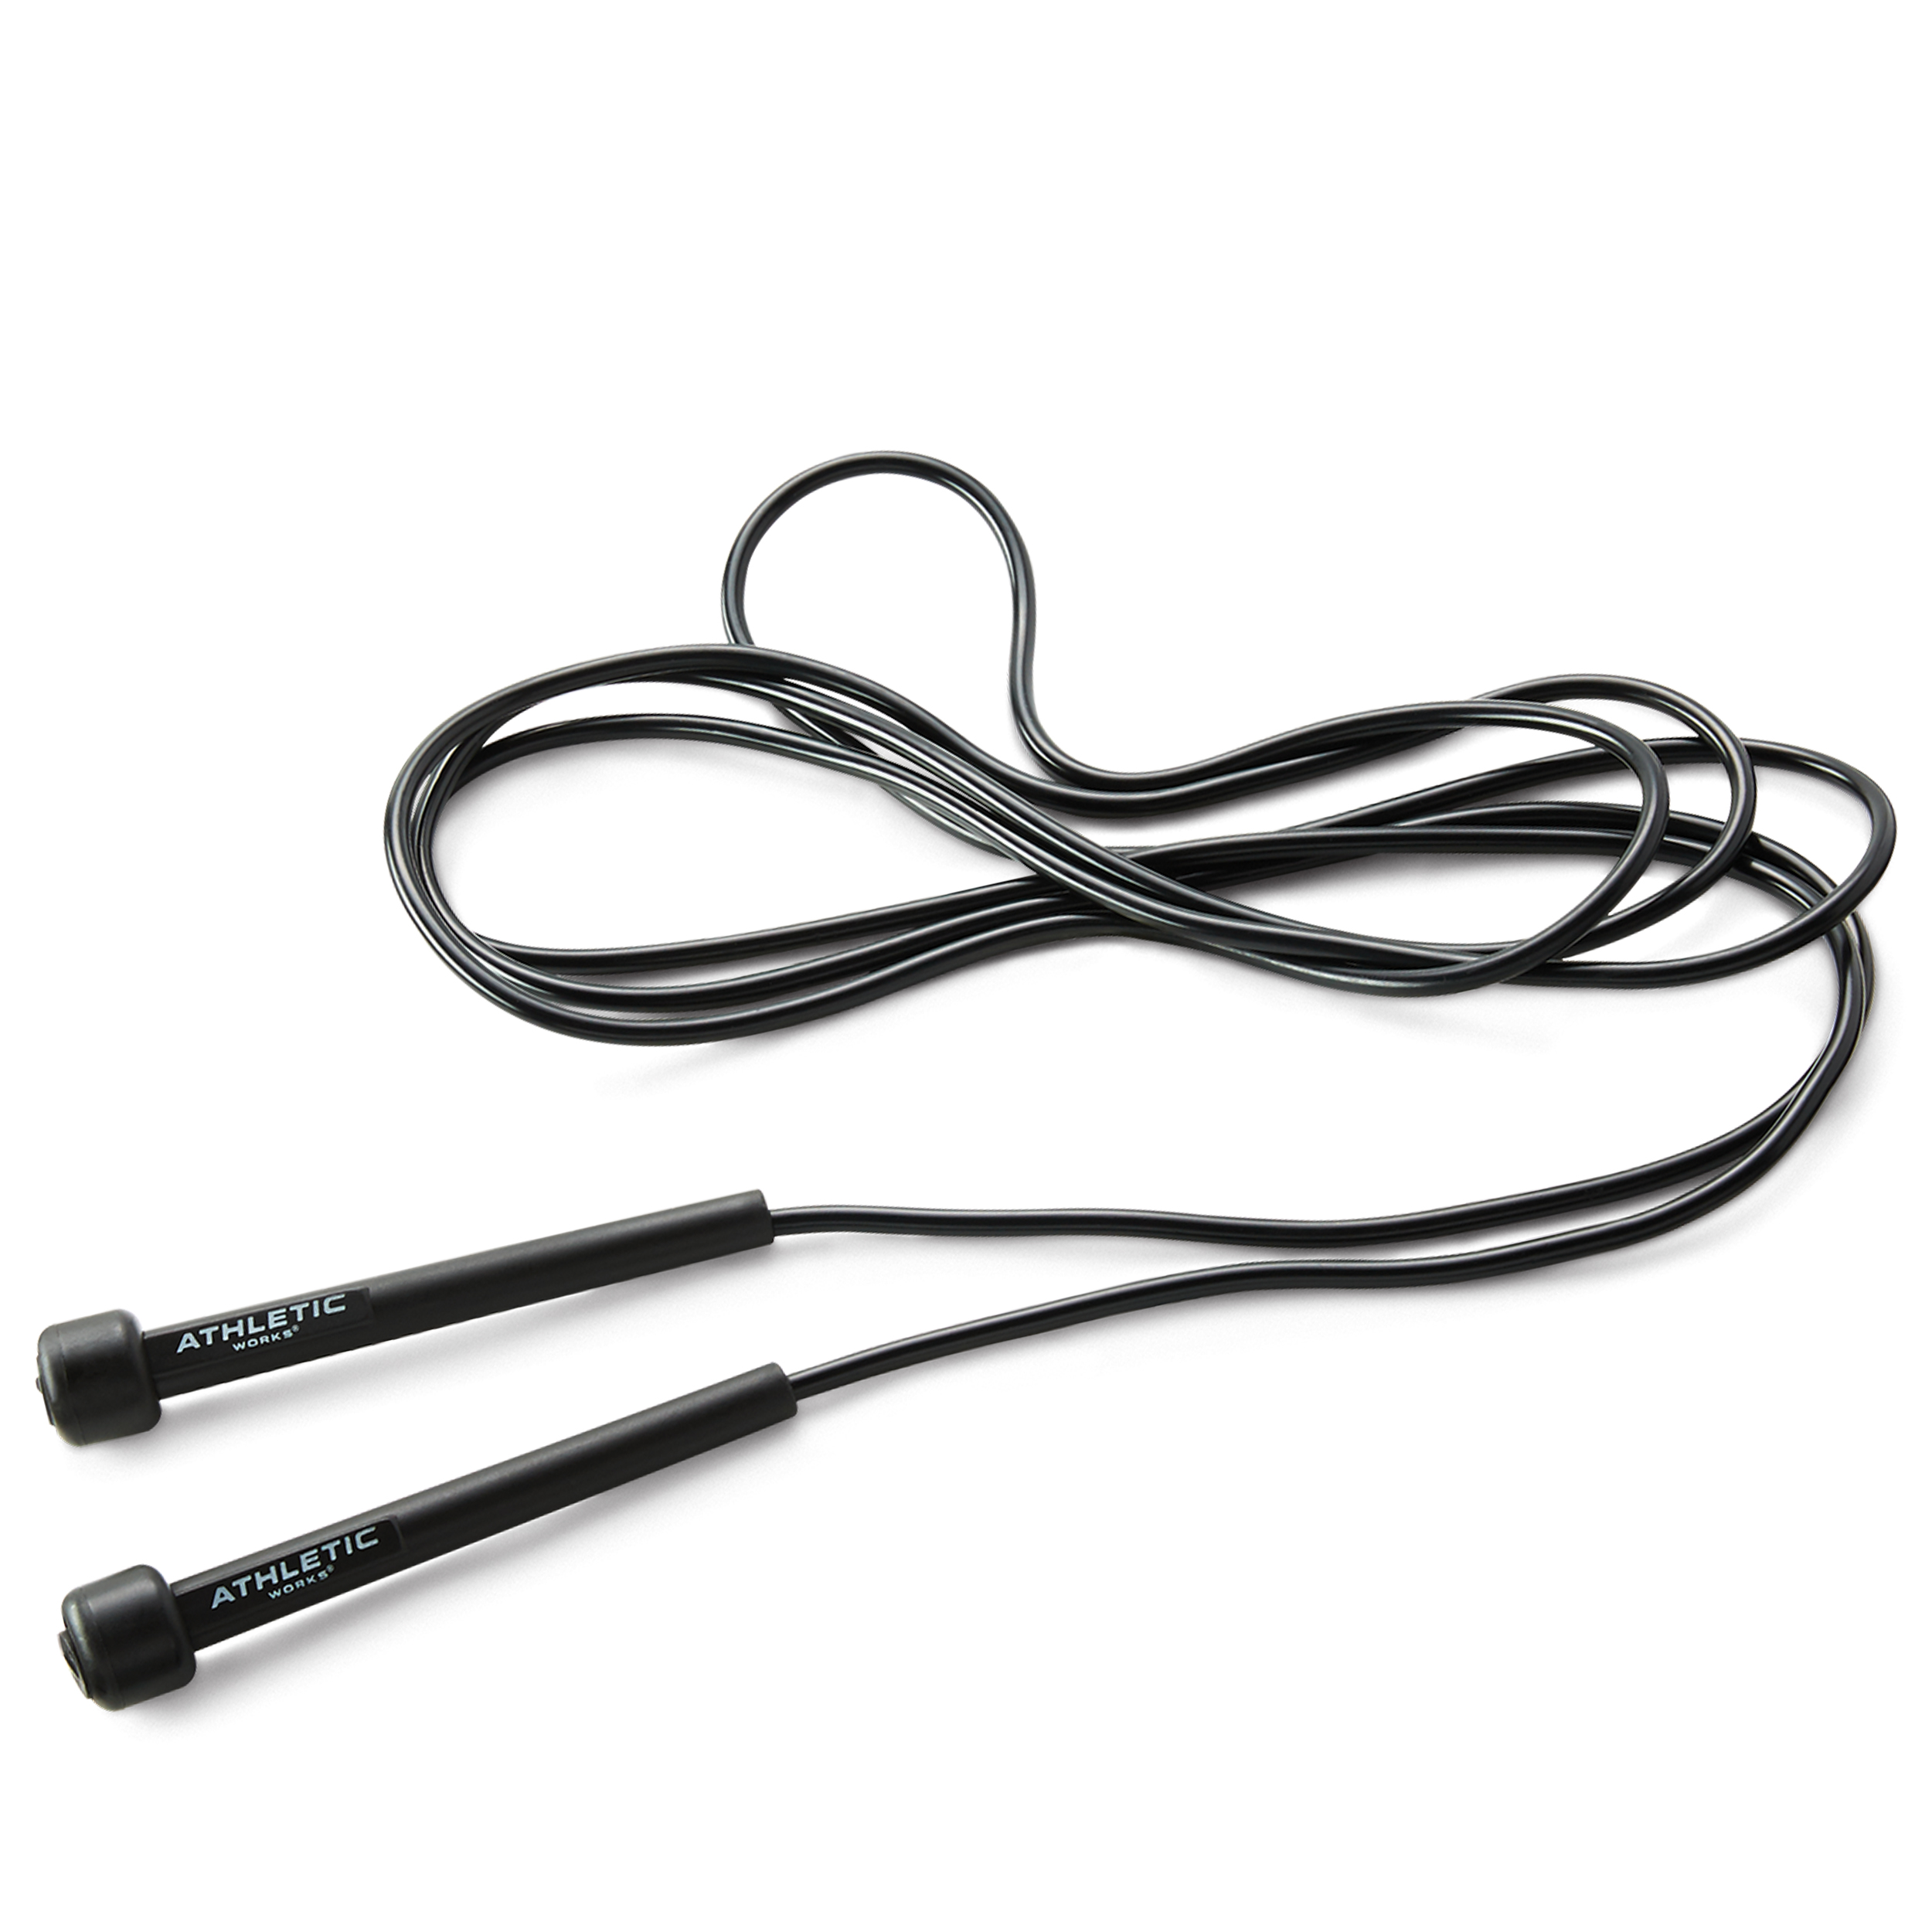 Ignite by SPRI Segmented Jump Rope B2 for sale online